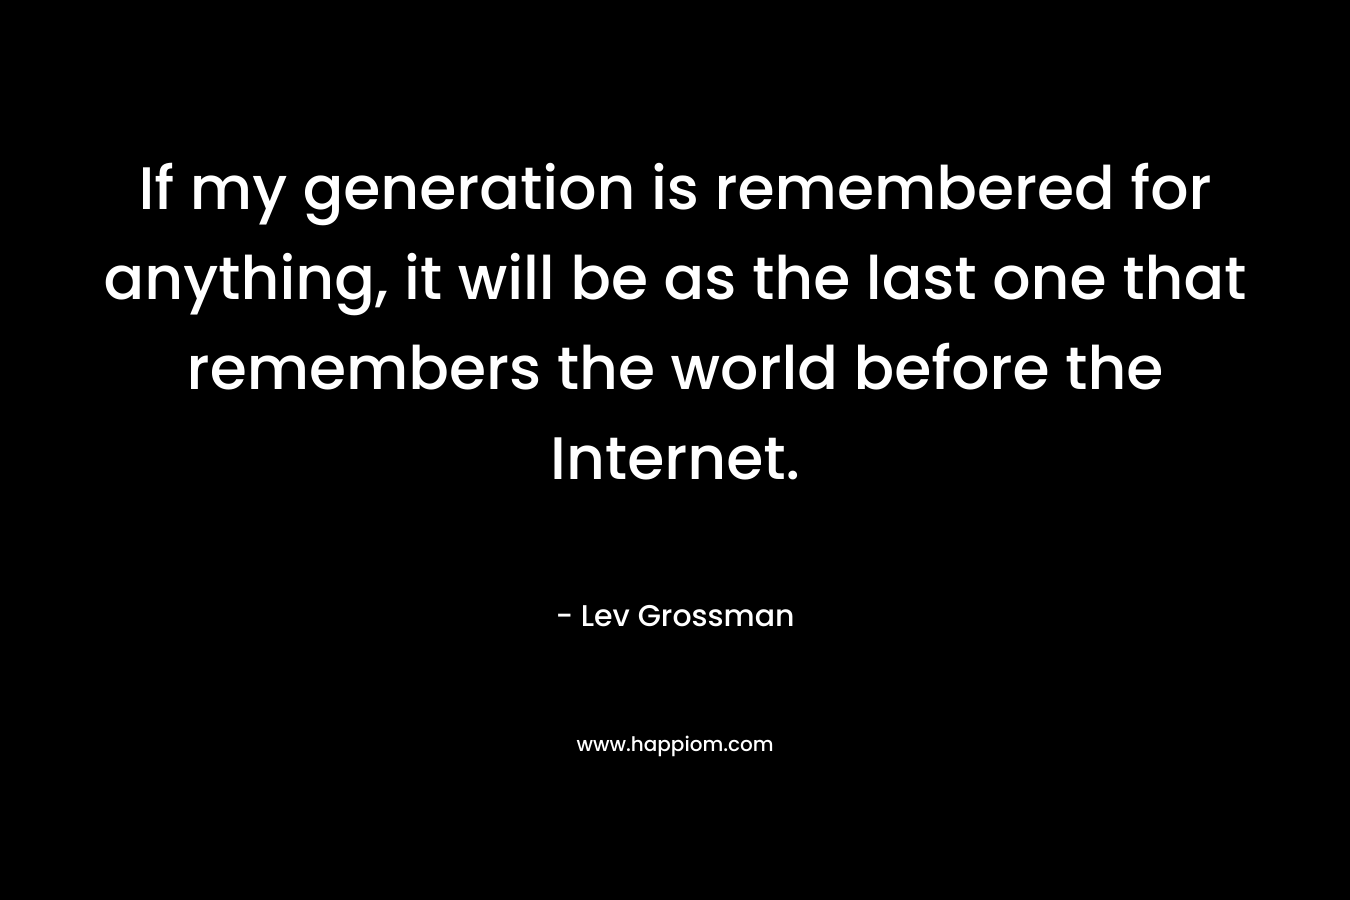 If my generation is remembered for anything, it will be as the last one that remembers the world before the Internet. – Lev Grossman